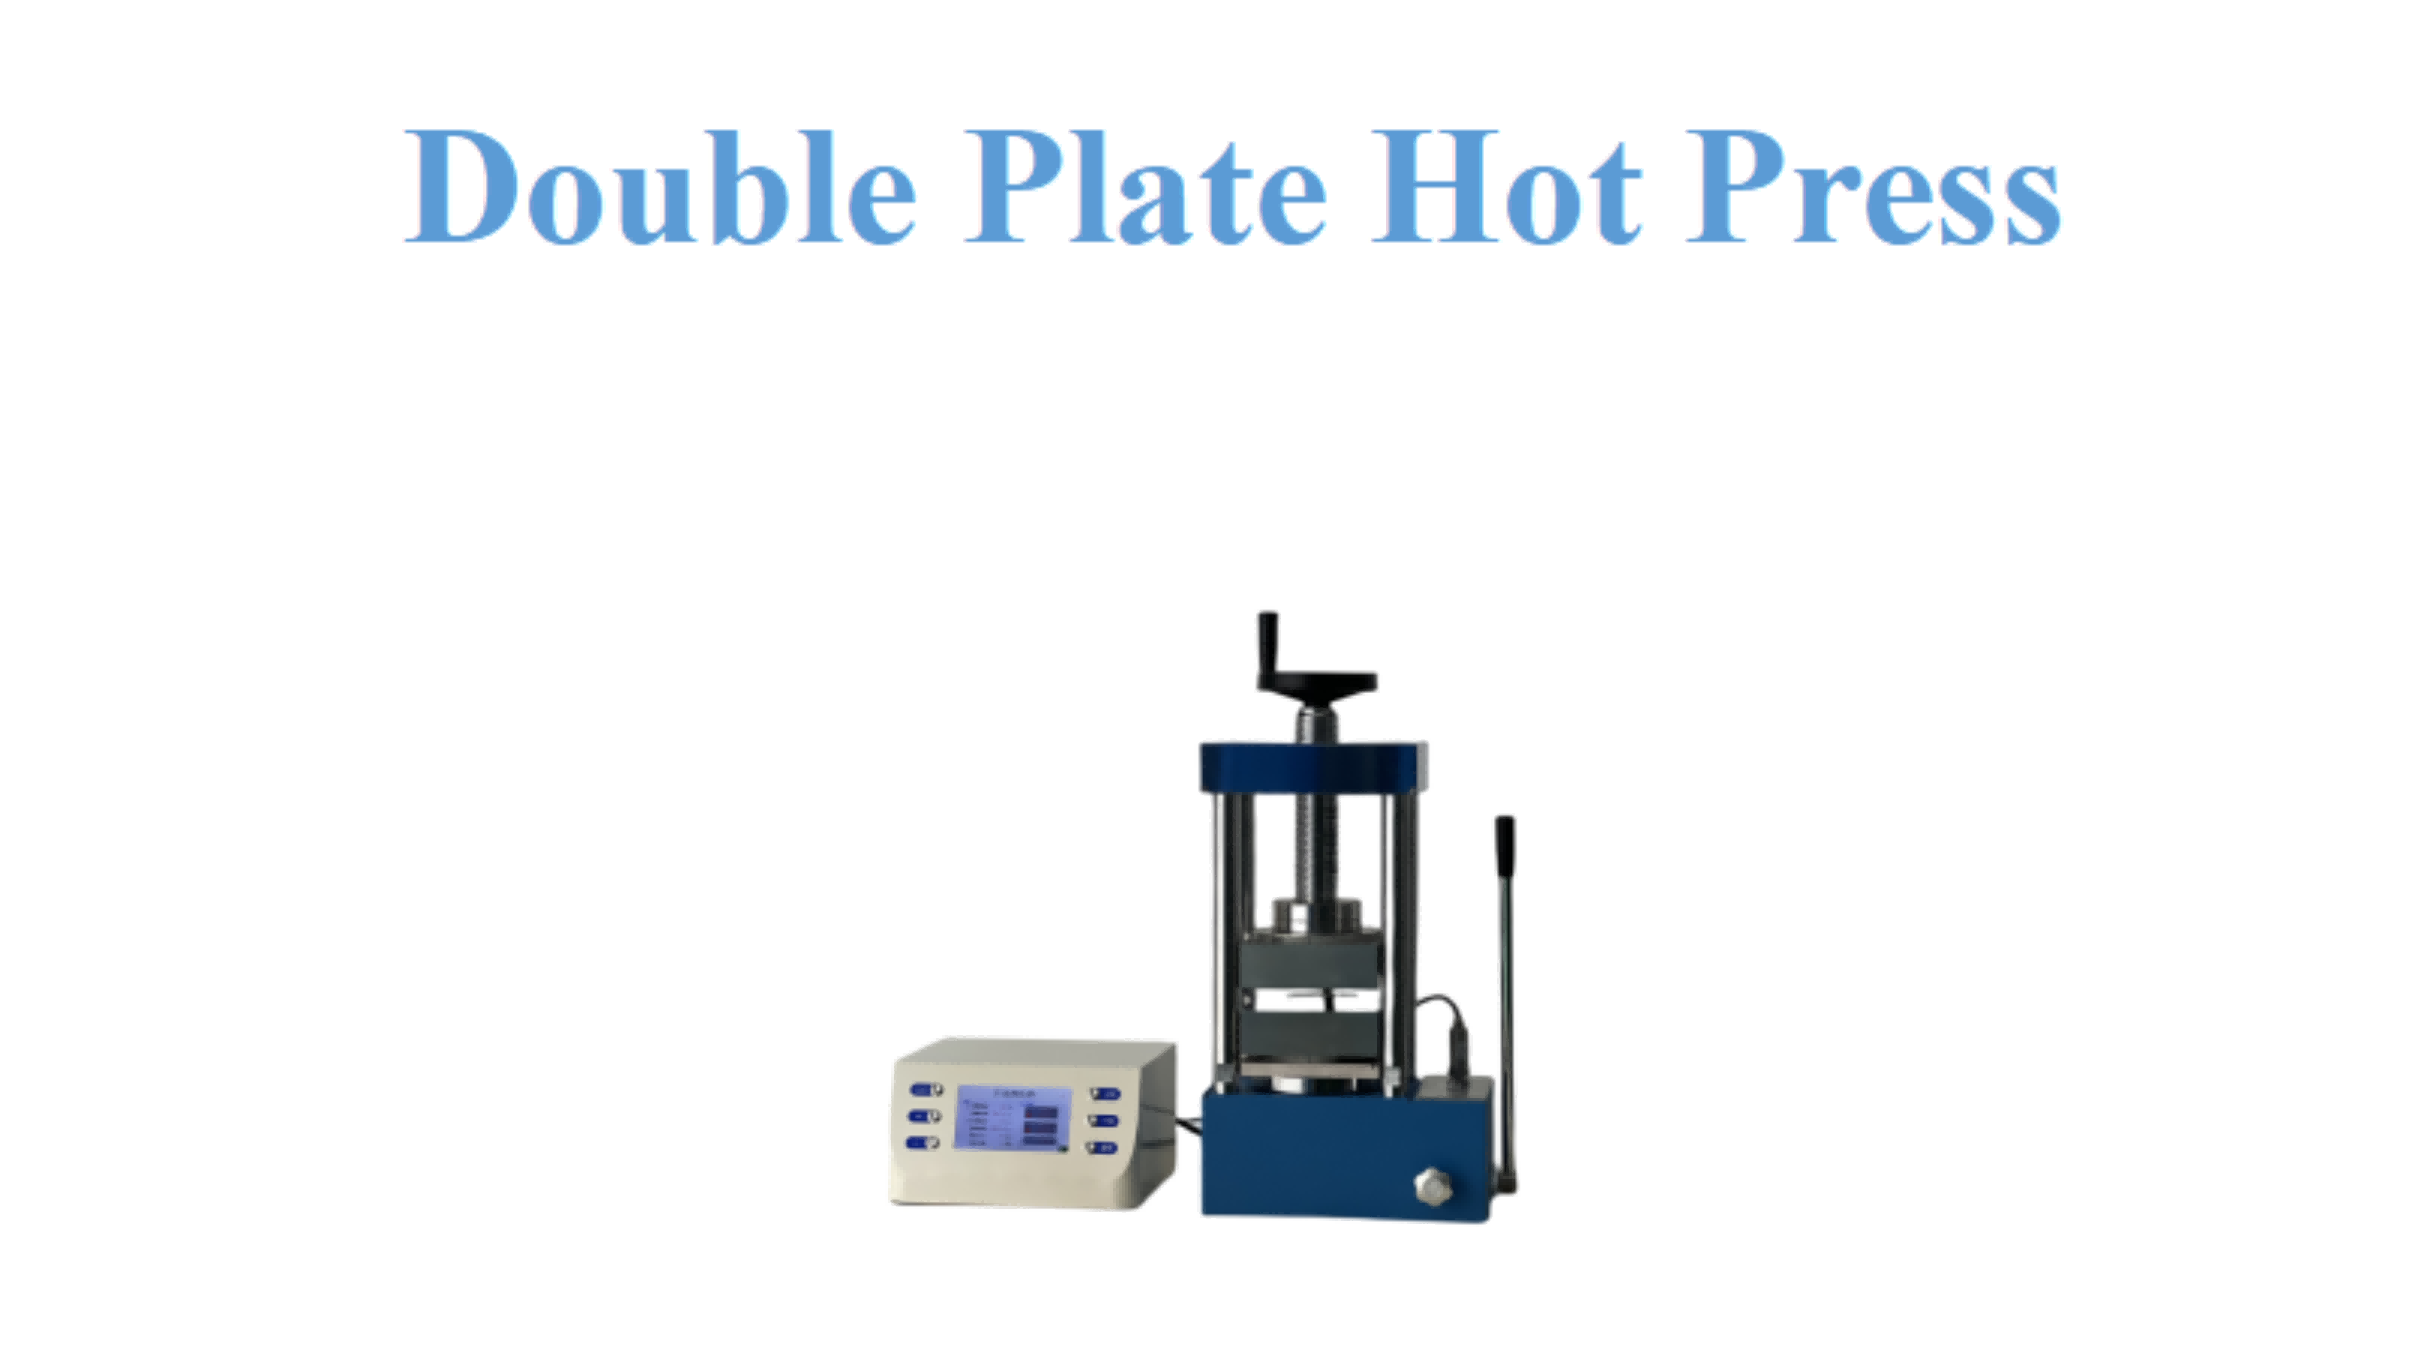 Double Plate Hot Press